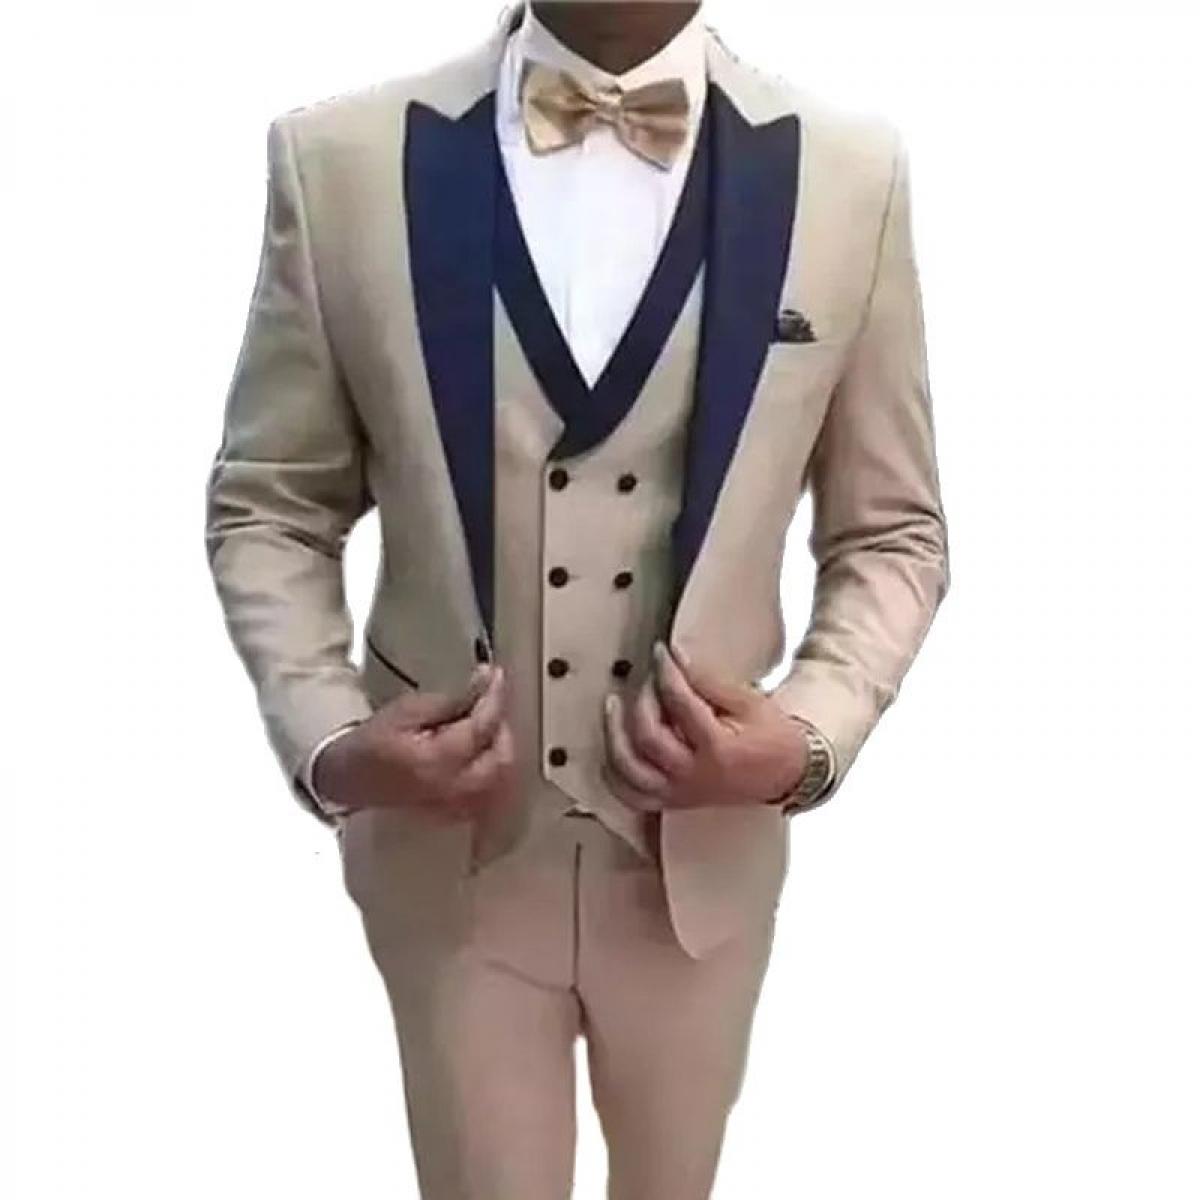 Beige Slim Fit Wedding Tuxedo For Groom 3 Piece Casual Man Suits Peaked Lapel Custom Waistcoat With Pants Male Fashion C